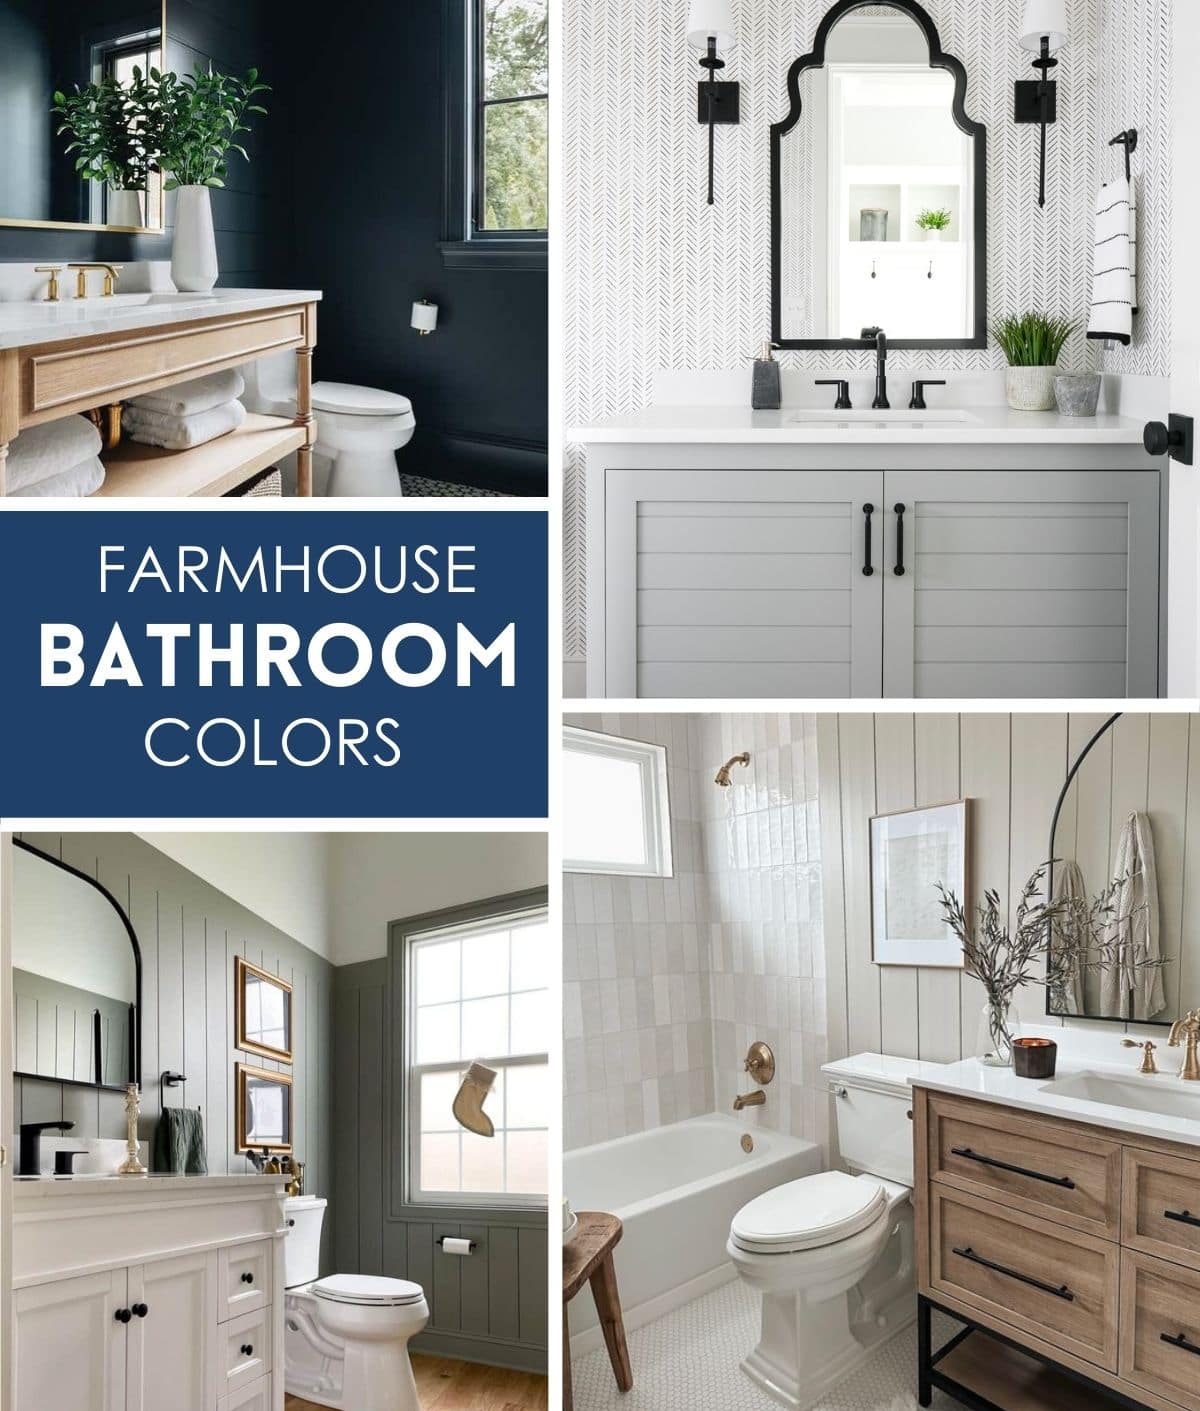 collection of different colored farmhouse bathrooms.